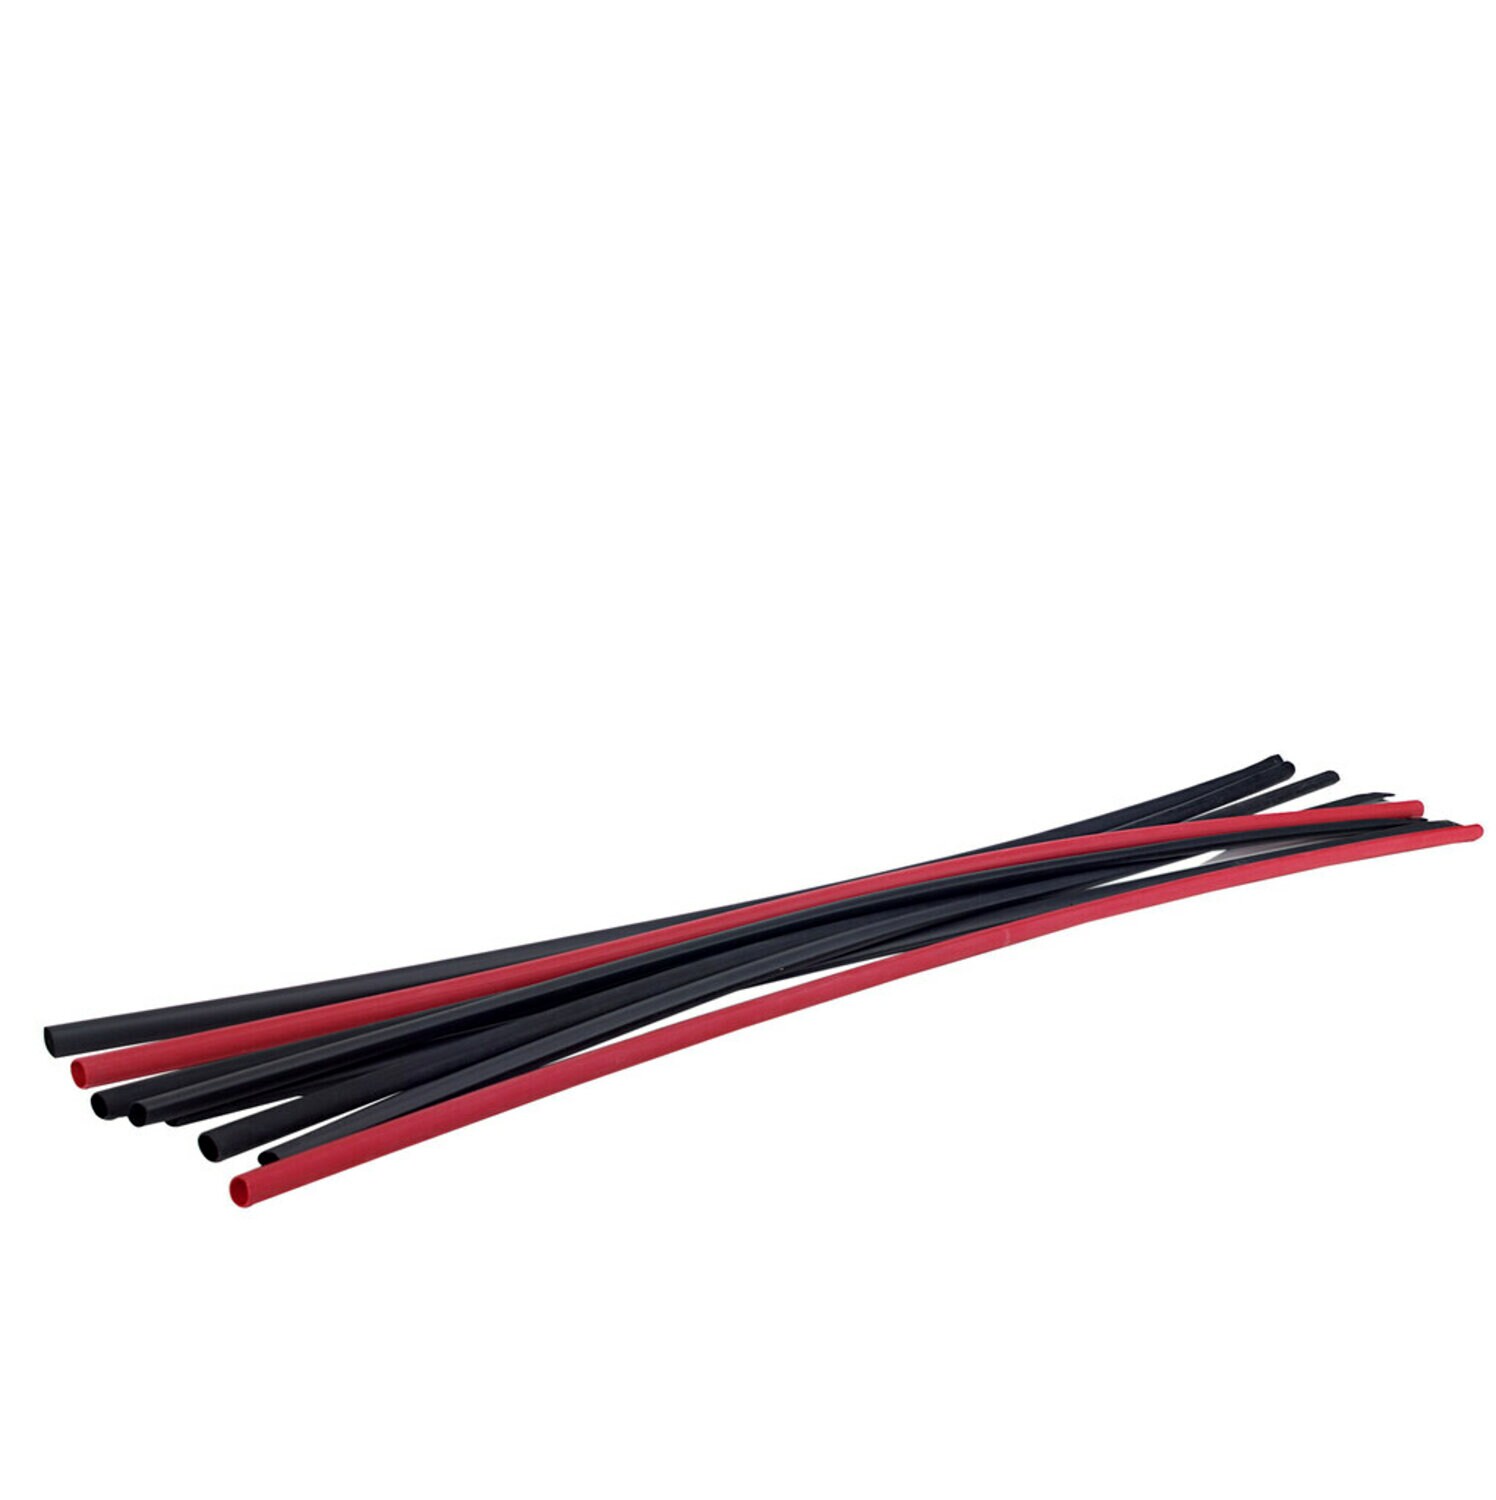 7000133567 - 3M Heat Shrink Thin-Wall Tubing FP-301-3/4-48"-Red-Hdr-12 Pcs, 48 in
Length sticks with header label, 12 pieces/case